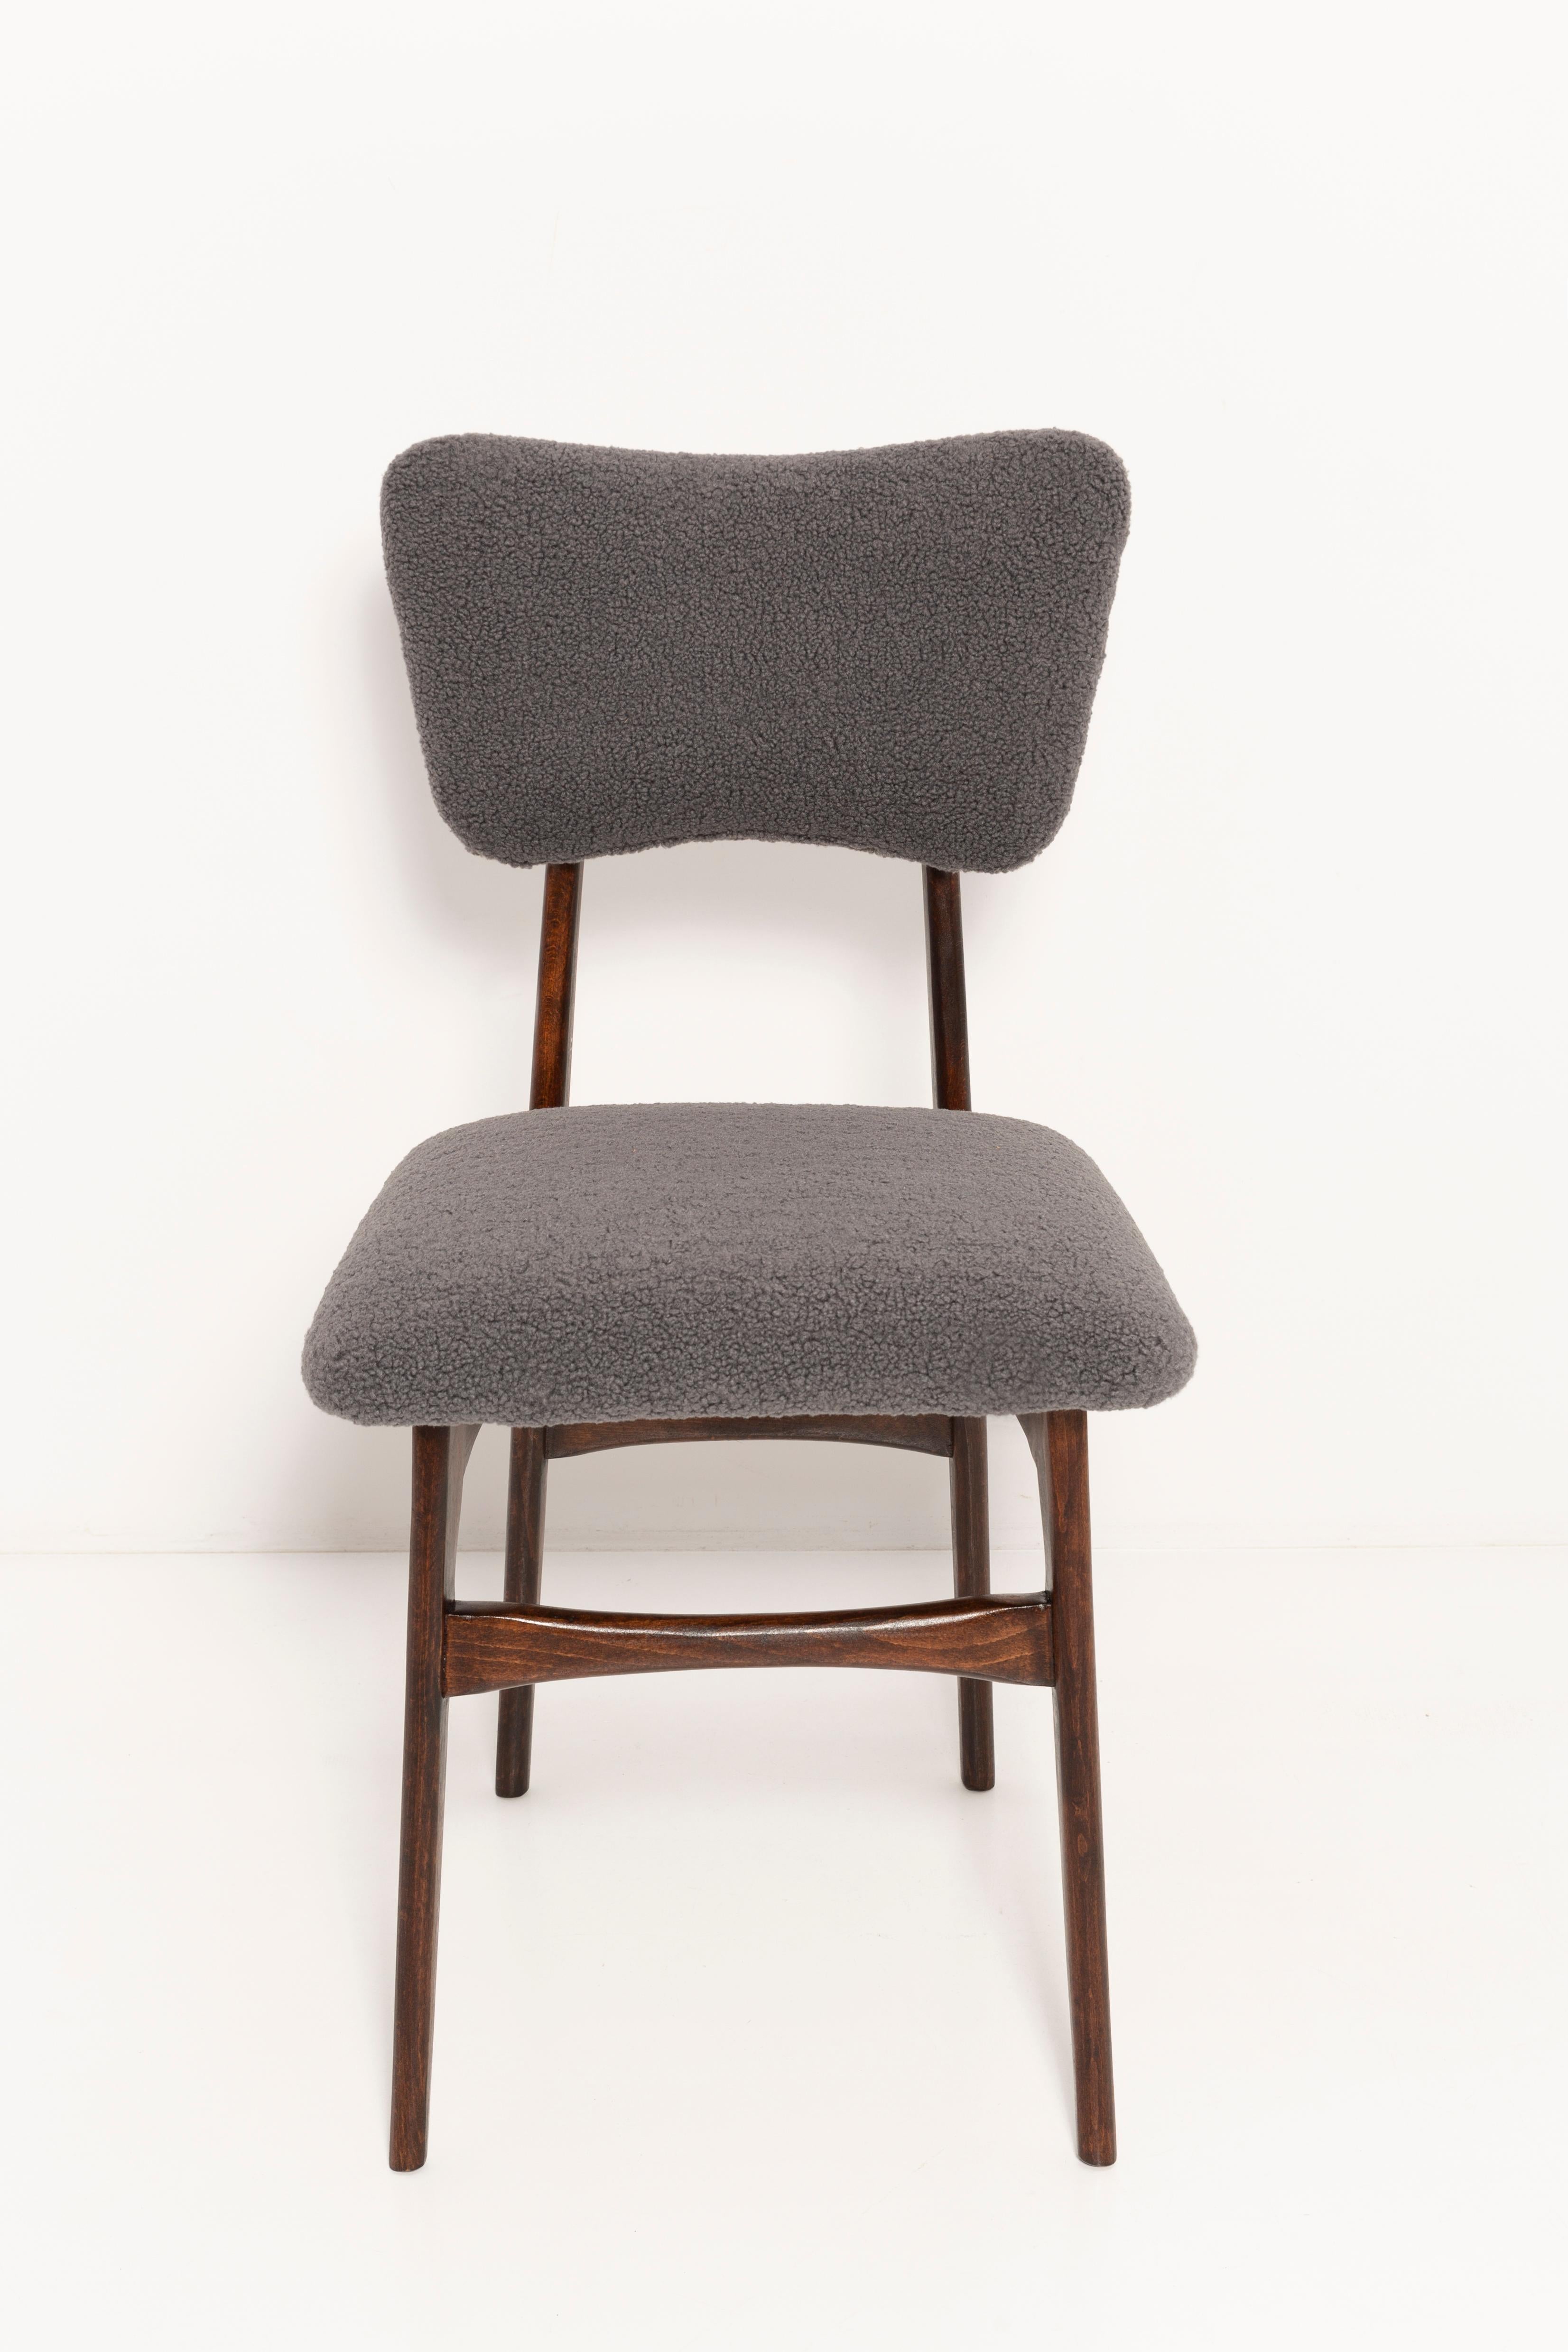 Set of Twelve 20th Century Dark Gray Boucle Chairs, Europe, 1960s For Sale 5